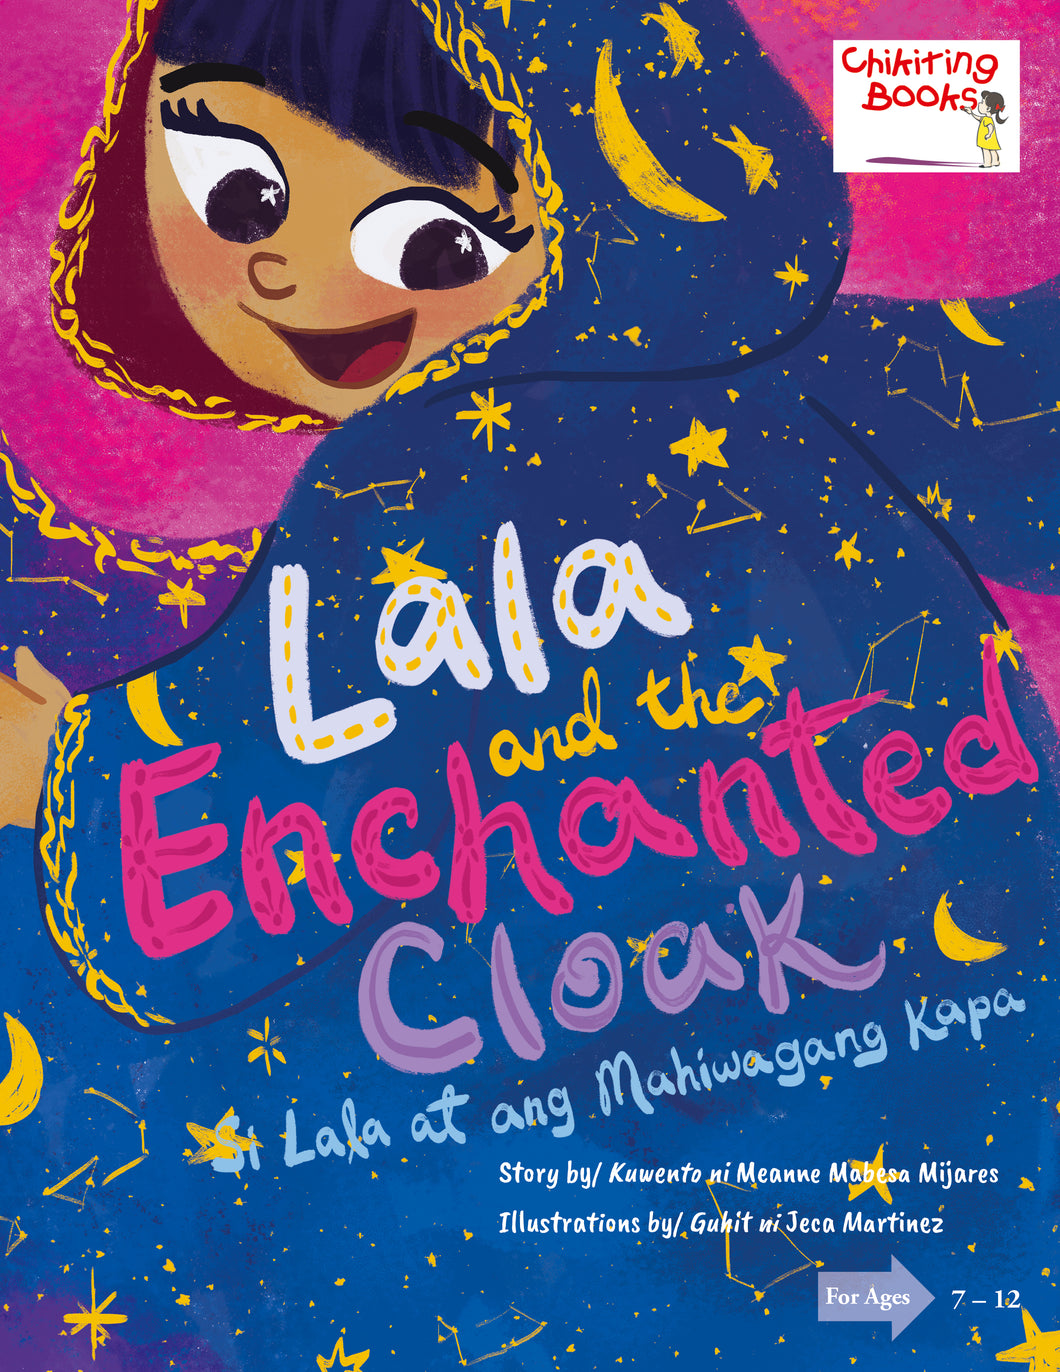 Lala and the Enchanted Cloak